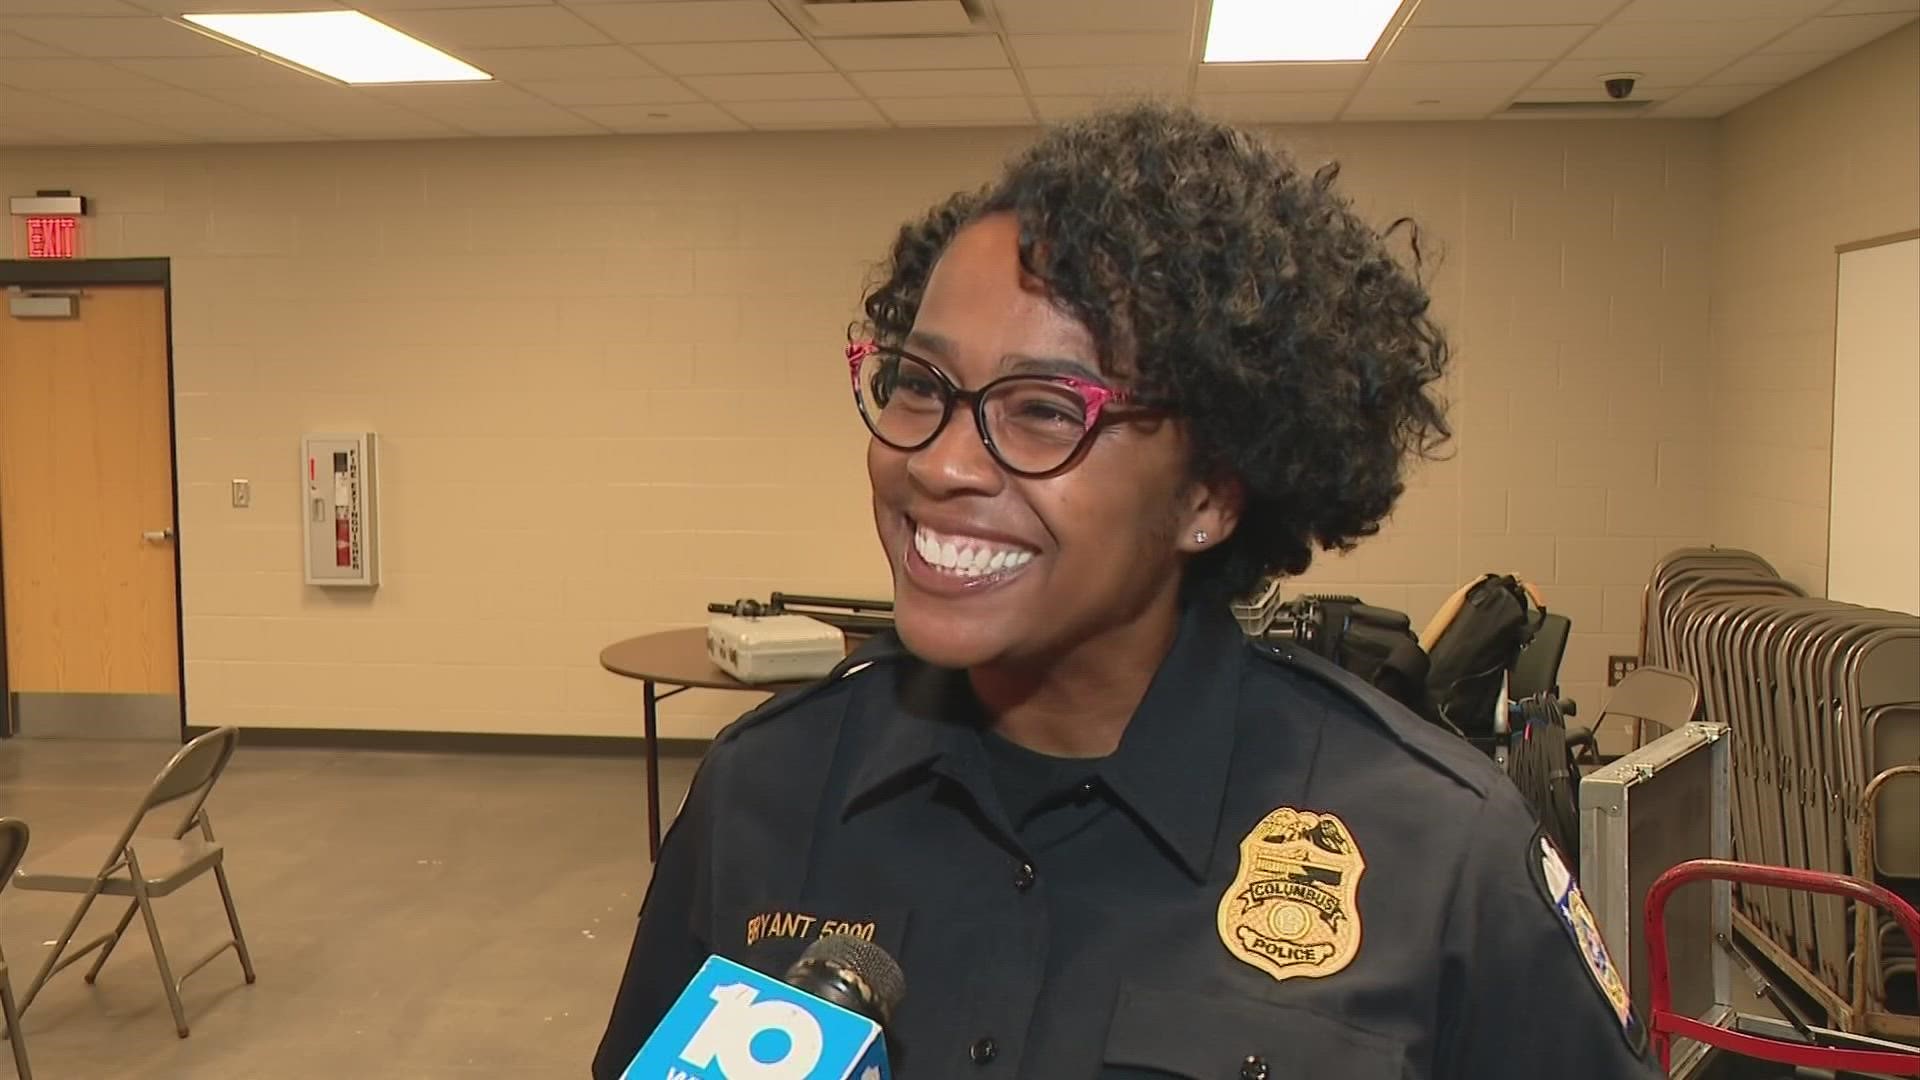 One year into the job, Bryant is smiling about what she has been able to accomplish.